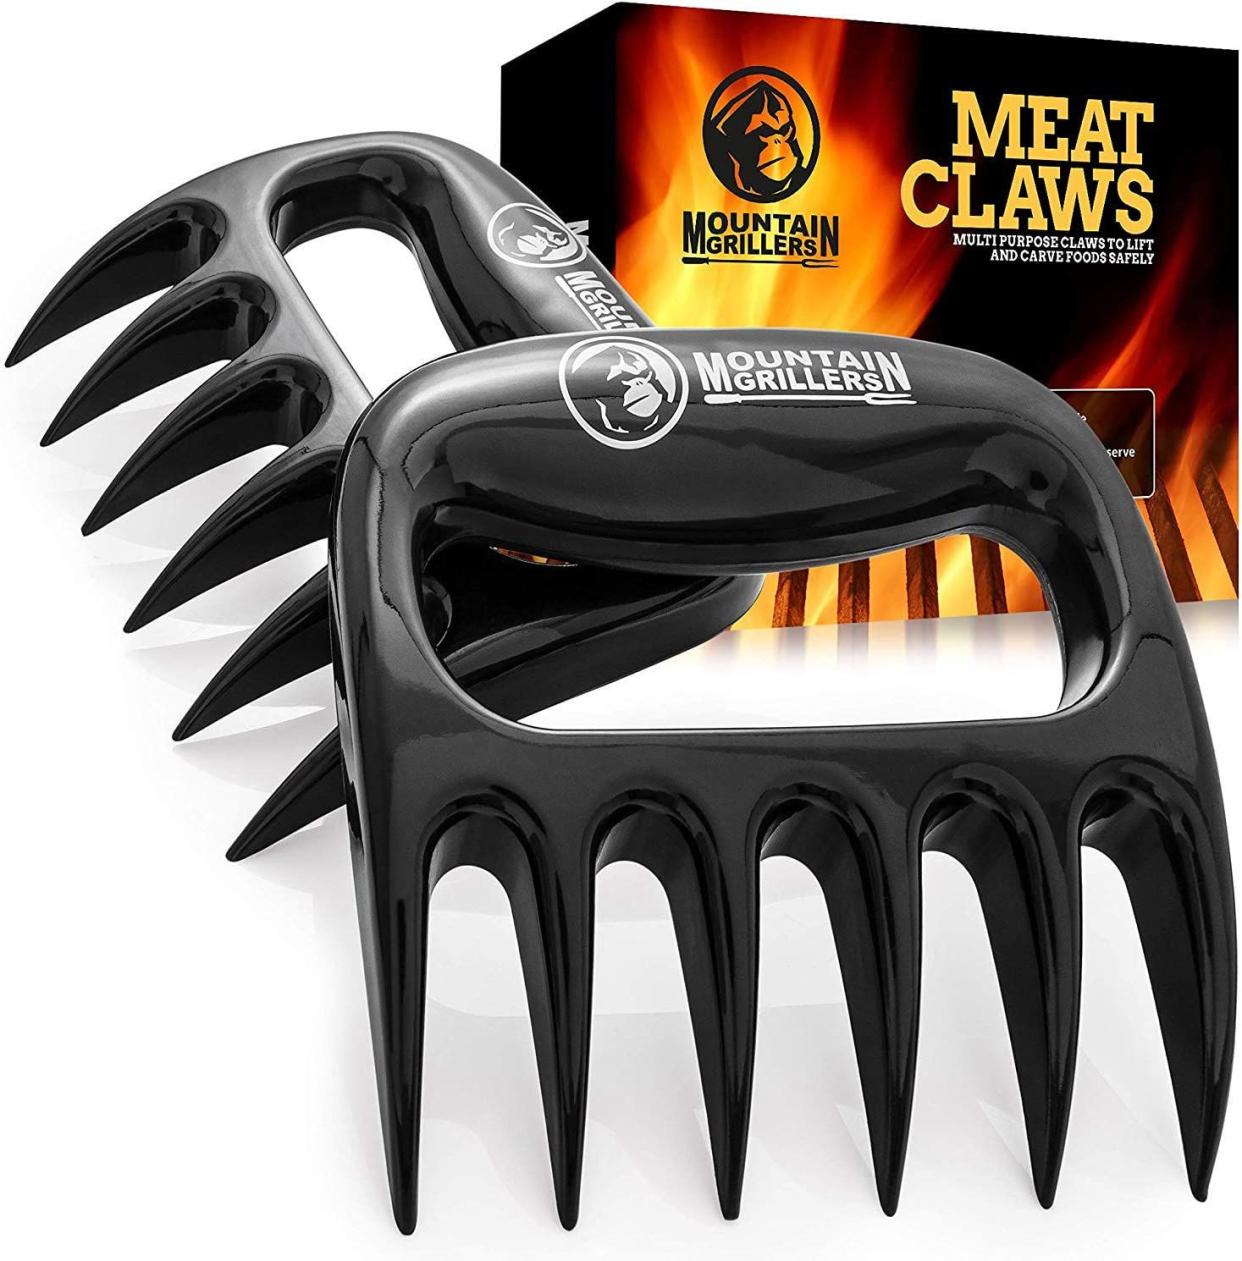 Mountain Grillers Meat Claws Black B077DKT757